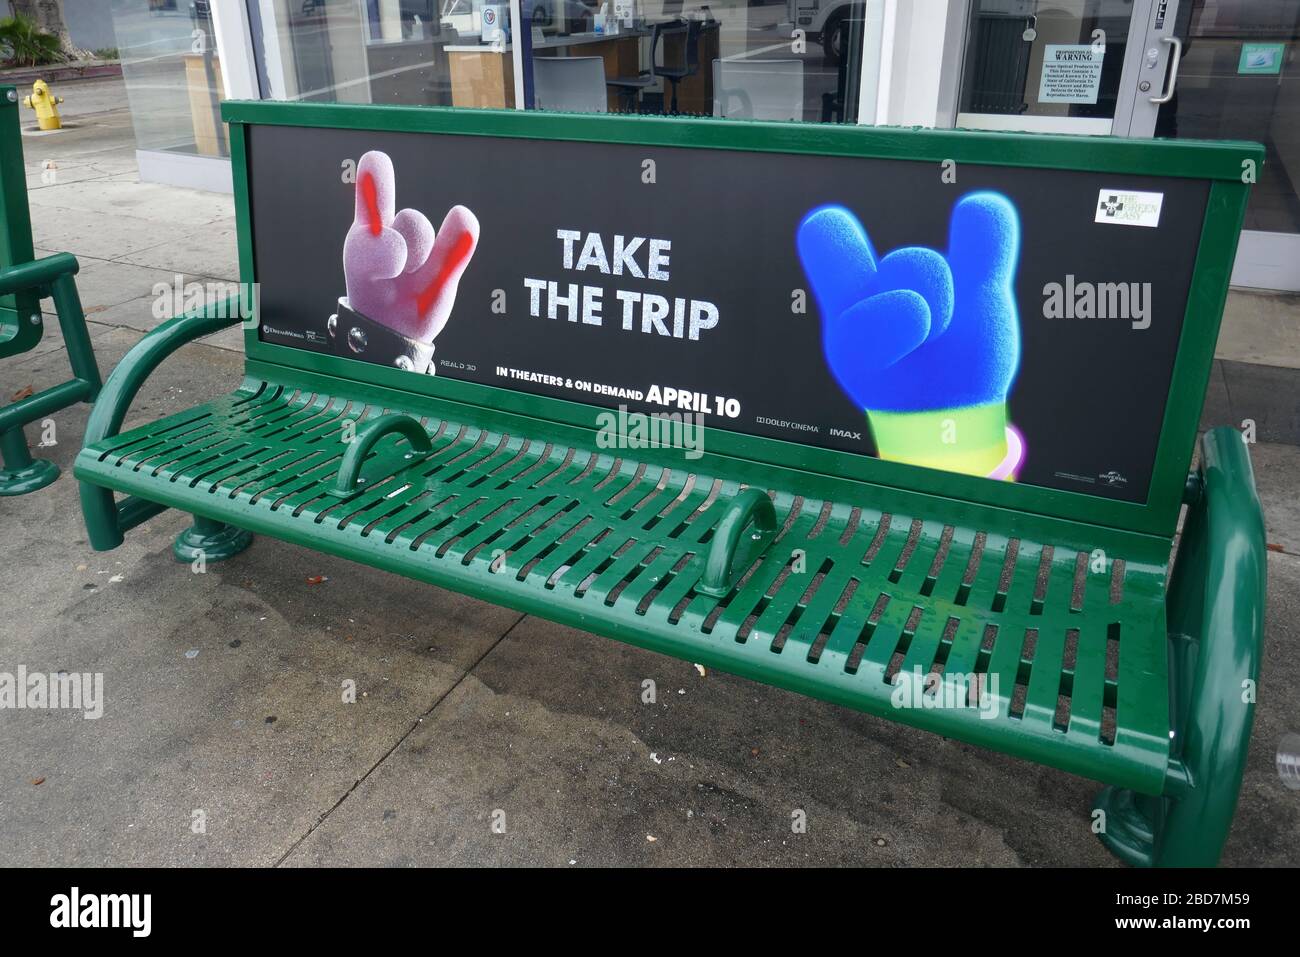 Los Angeles, California, USA 1st April 2020 A general view of atmosphere of Trolls World Tour on Bus bench with empty streets due to outbreak of Coronavirus as people practice social distancing during Stay At Home order on April 1, 2020 in Los Angeles, California, USA. Photo by Barry King/Alamy Stock Photo Stock Photo